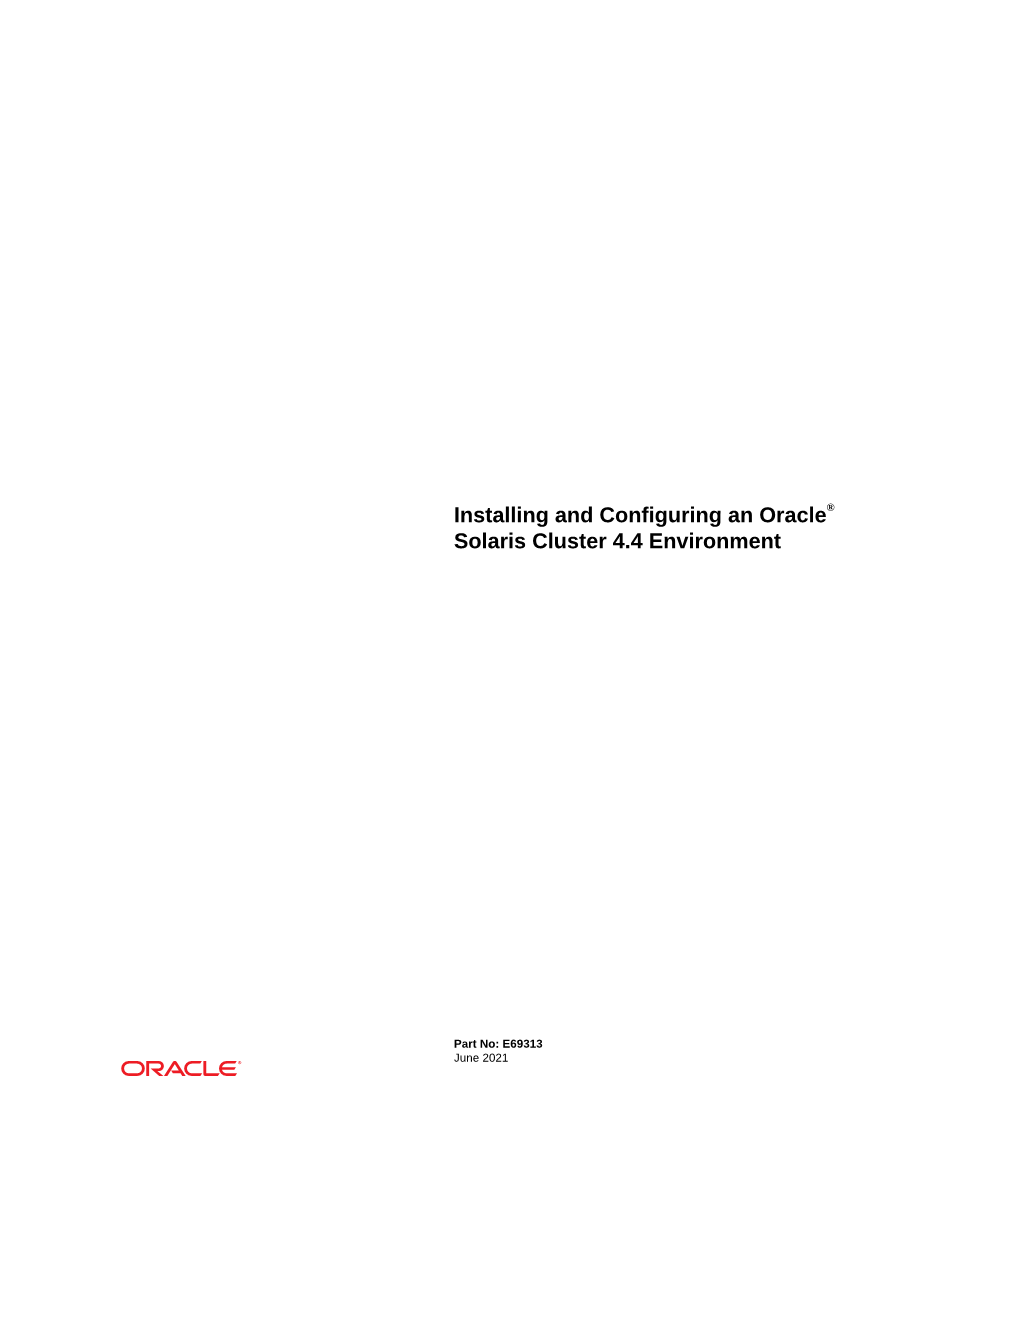 Installing and Configuring an Oracle® Solaris Cluster 4.4 Environment